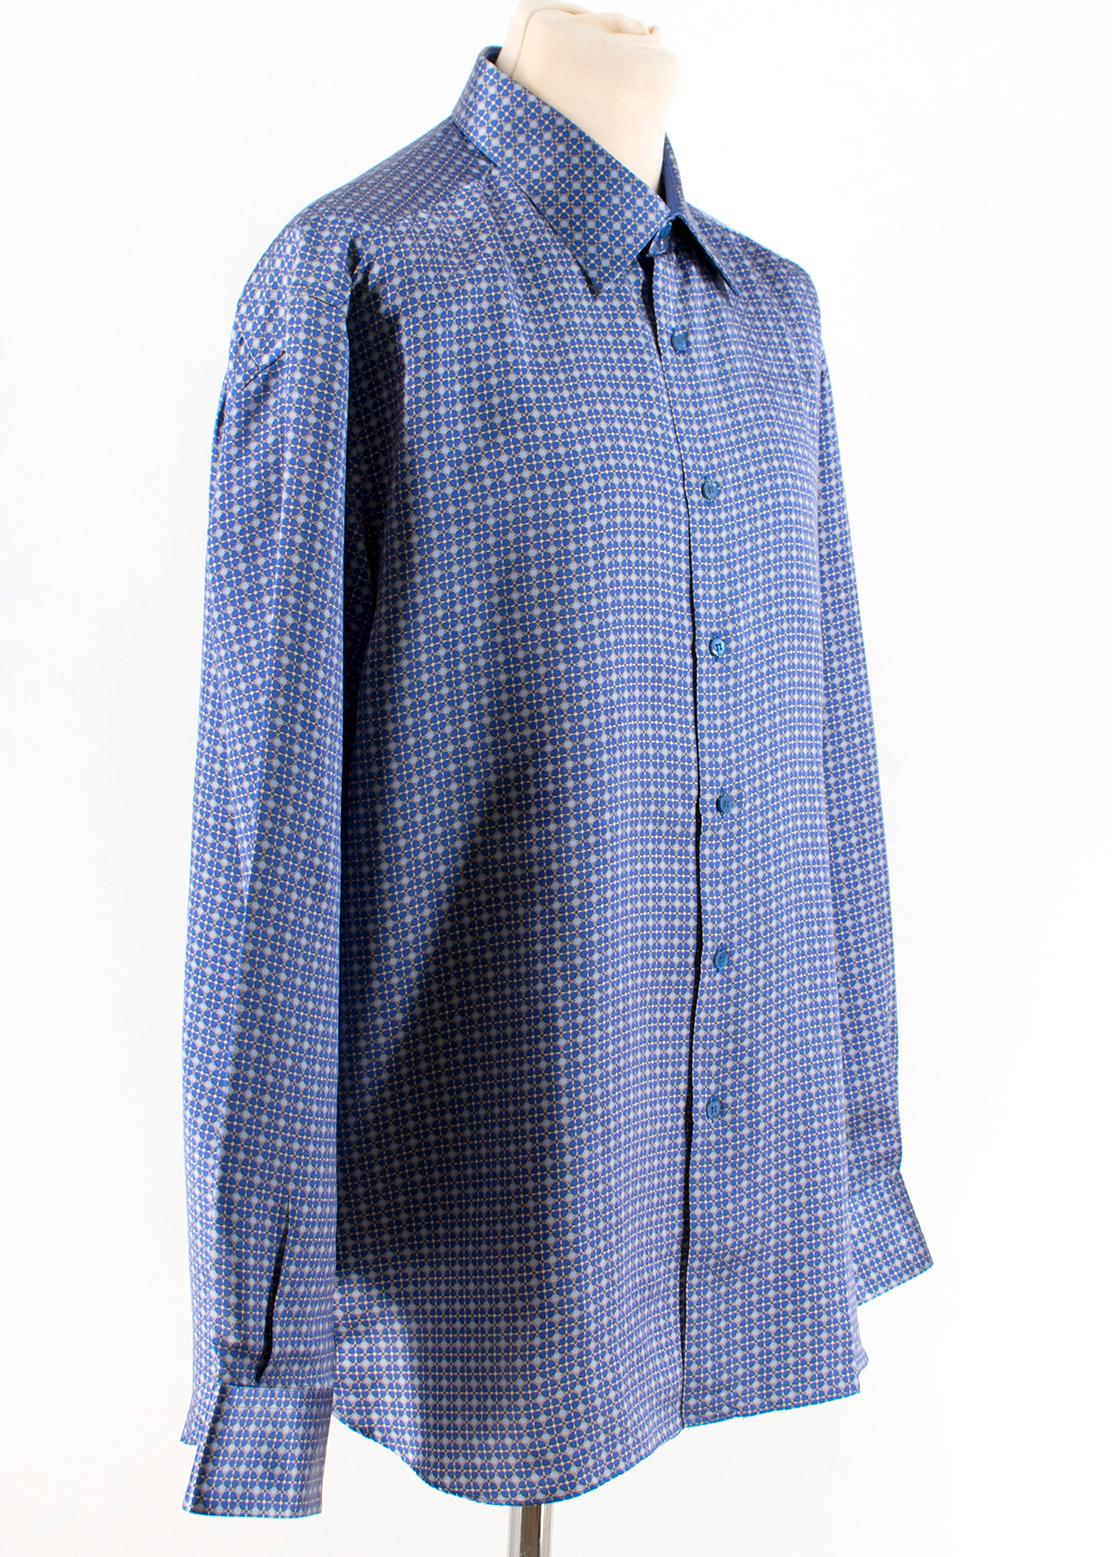 Stefano Ricci Blue Print Silk Shirt 

- Blue Print Patterned Shirt 
- 100% Silk 
- Stiff point collar and sleeves 
- Blue buttoned down center front and sleeves 

Please note, these items are pre-owned and may show some signs of storage, even when